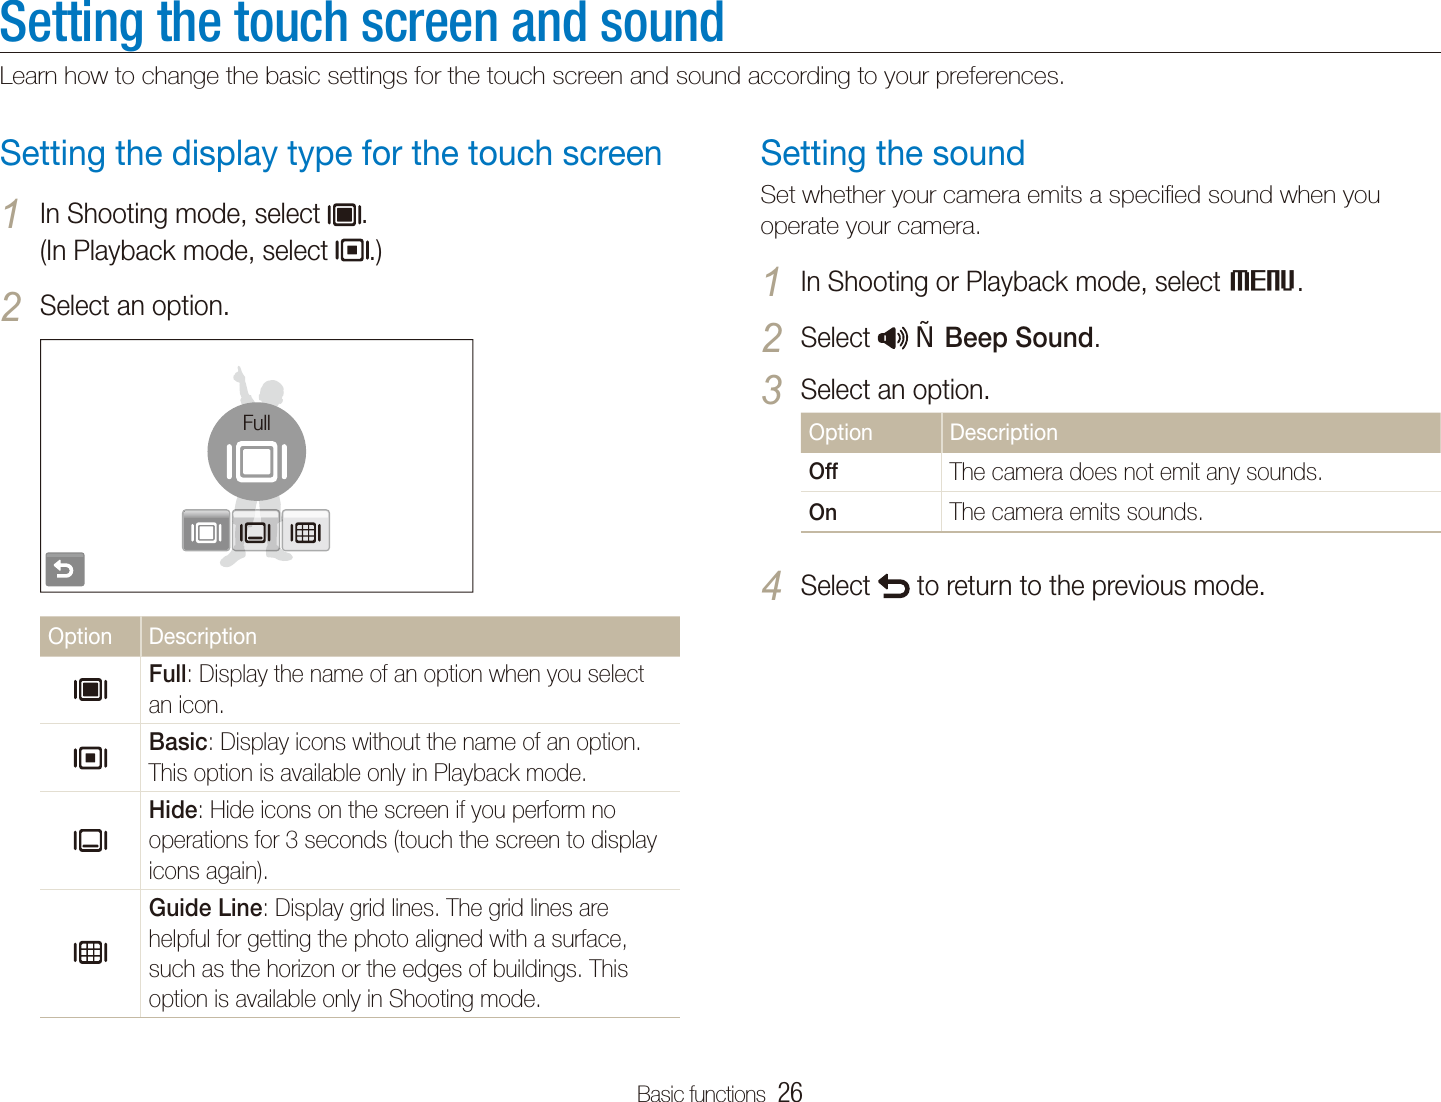 Basic functions  26Setting the touch screen and soundLearn how to change the basic settings for the touch screen and sound according to your preferences.Setting the soundSet whether your camera emits a speciﬁed sound when you operate your camera.In Shooting or Playback mode, select 1 M.Select 2   Beep Sound.Select an option.3 Option DescriptionOff The camera does not emit any sounds.On The camera emits sounds.Select 4  to return to the previous mode.Setting the display type for the touch screenIn Shooting mode, select 1 .  (In Playback mode, select  .)Select an option.2 FullOption DescriptionFull: Display the name of an option when you select an icon.Basic: Display icons without the name of an option. This option is available only in Playback mode.Hide: Hide icons on the screen if you perform no operations for 3 seconds (touch the screen to display icons again).Guide Line: Display grid lines. The grid lines are helpful for getting the photo aligned with a surface, such as the horizon or the edges of buildings. This option is available only in Shooting mode.